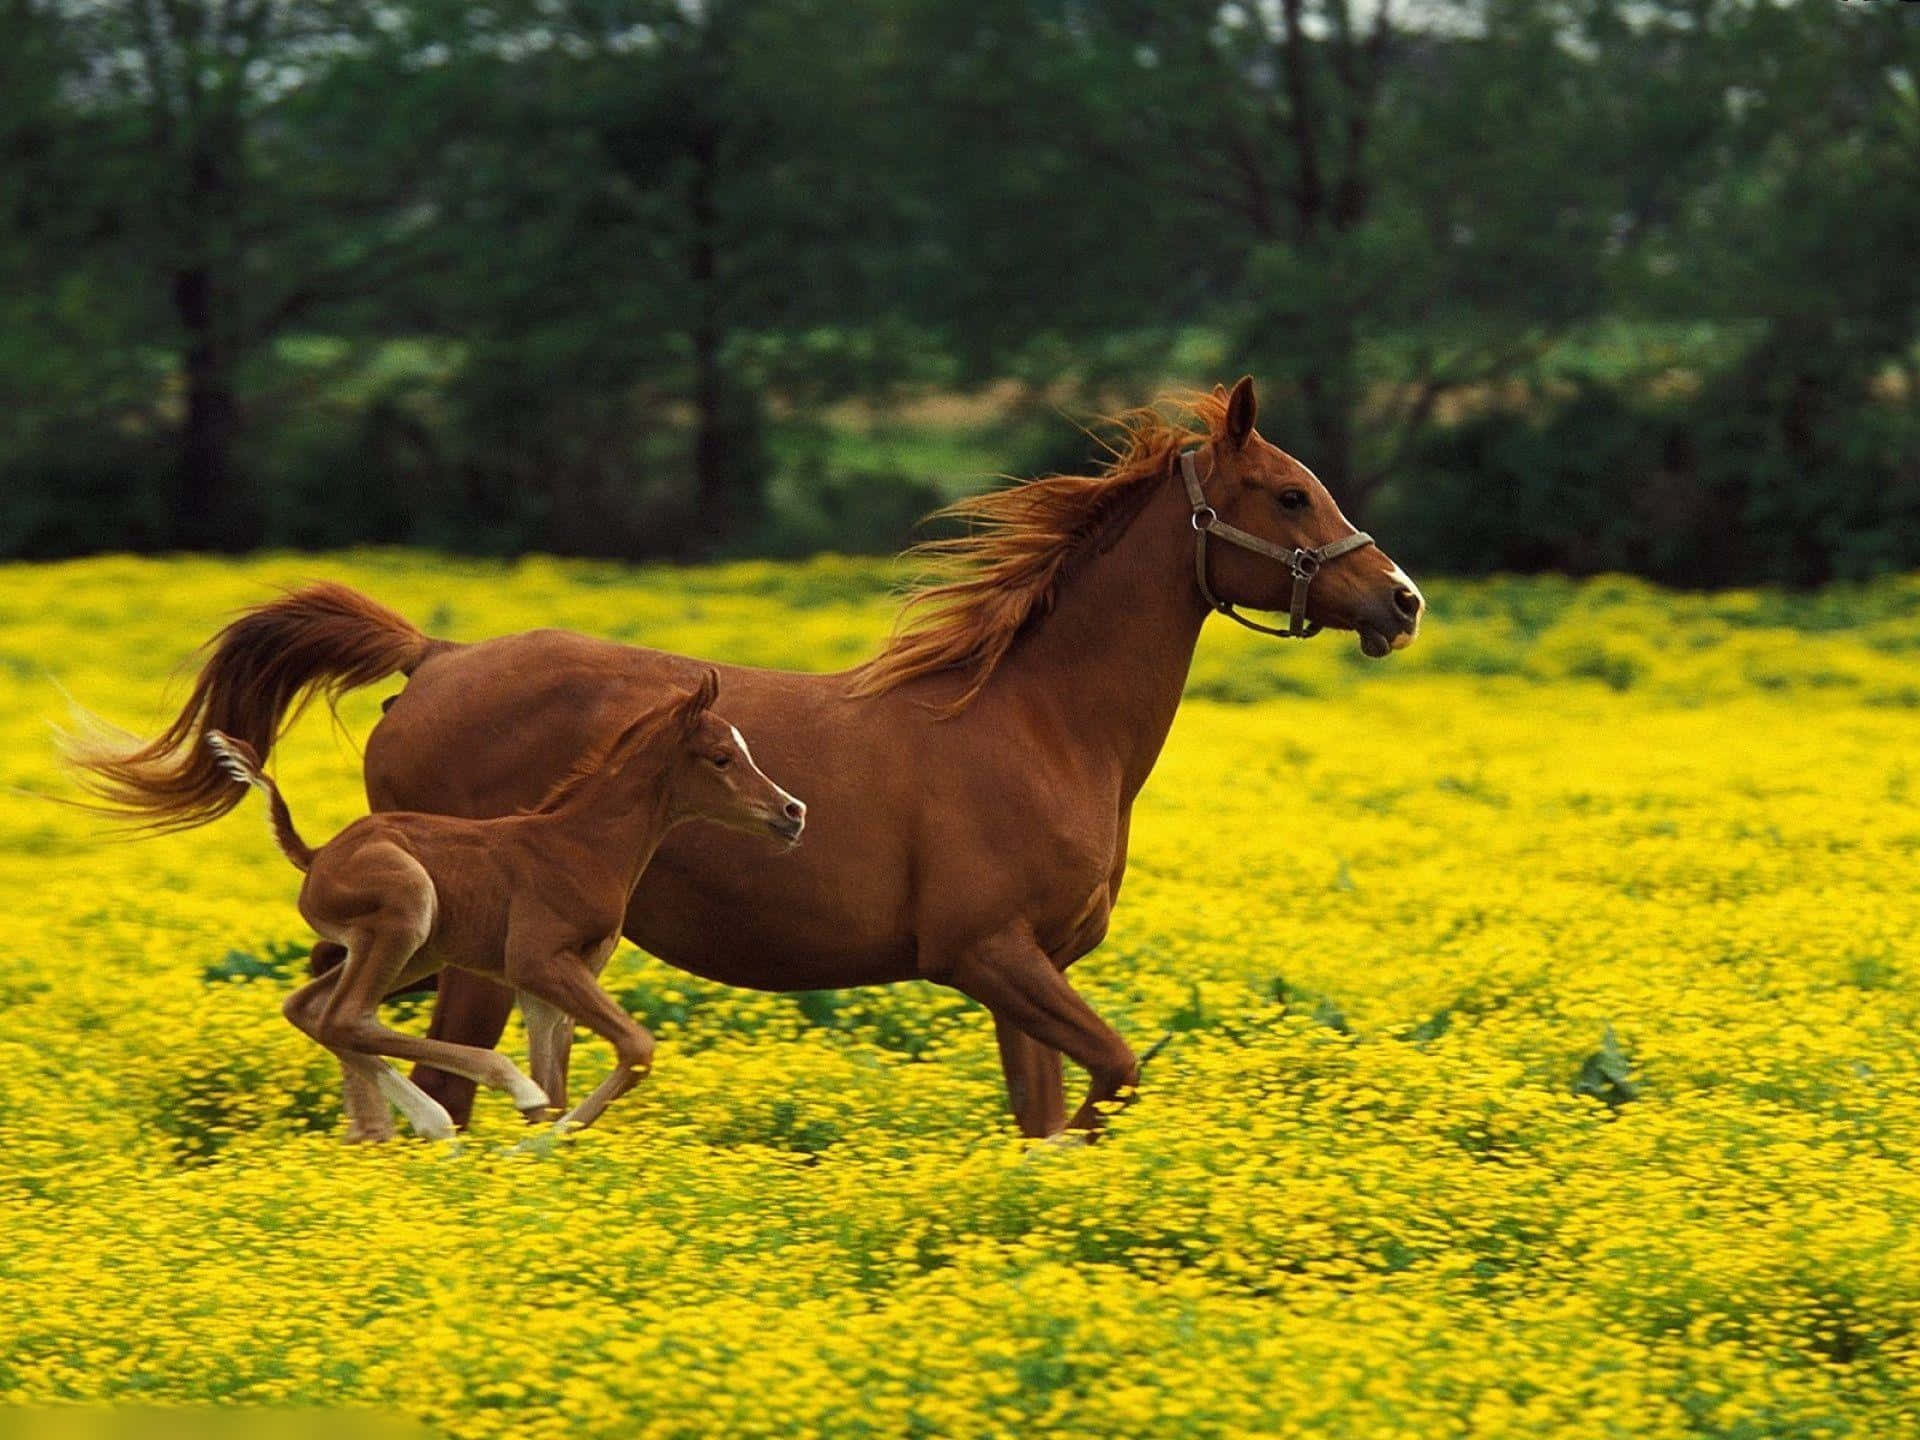 A Horse And A Foal Running In A Field